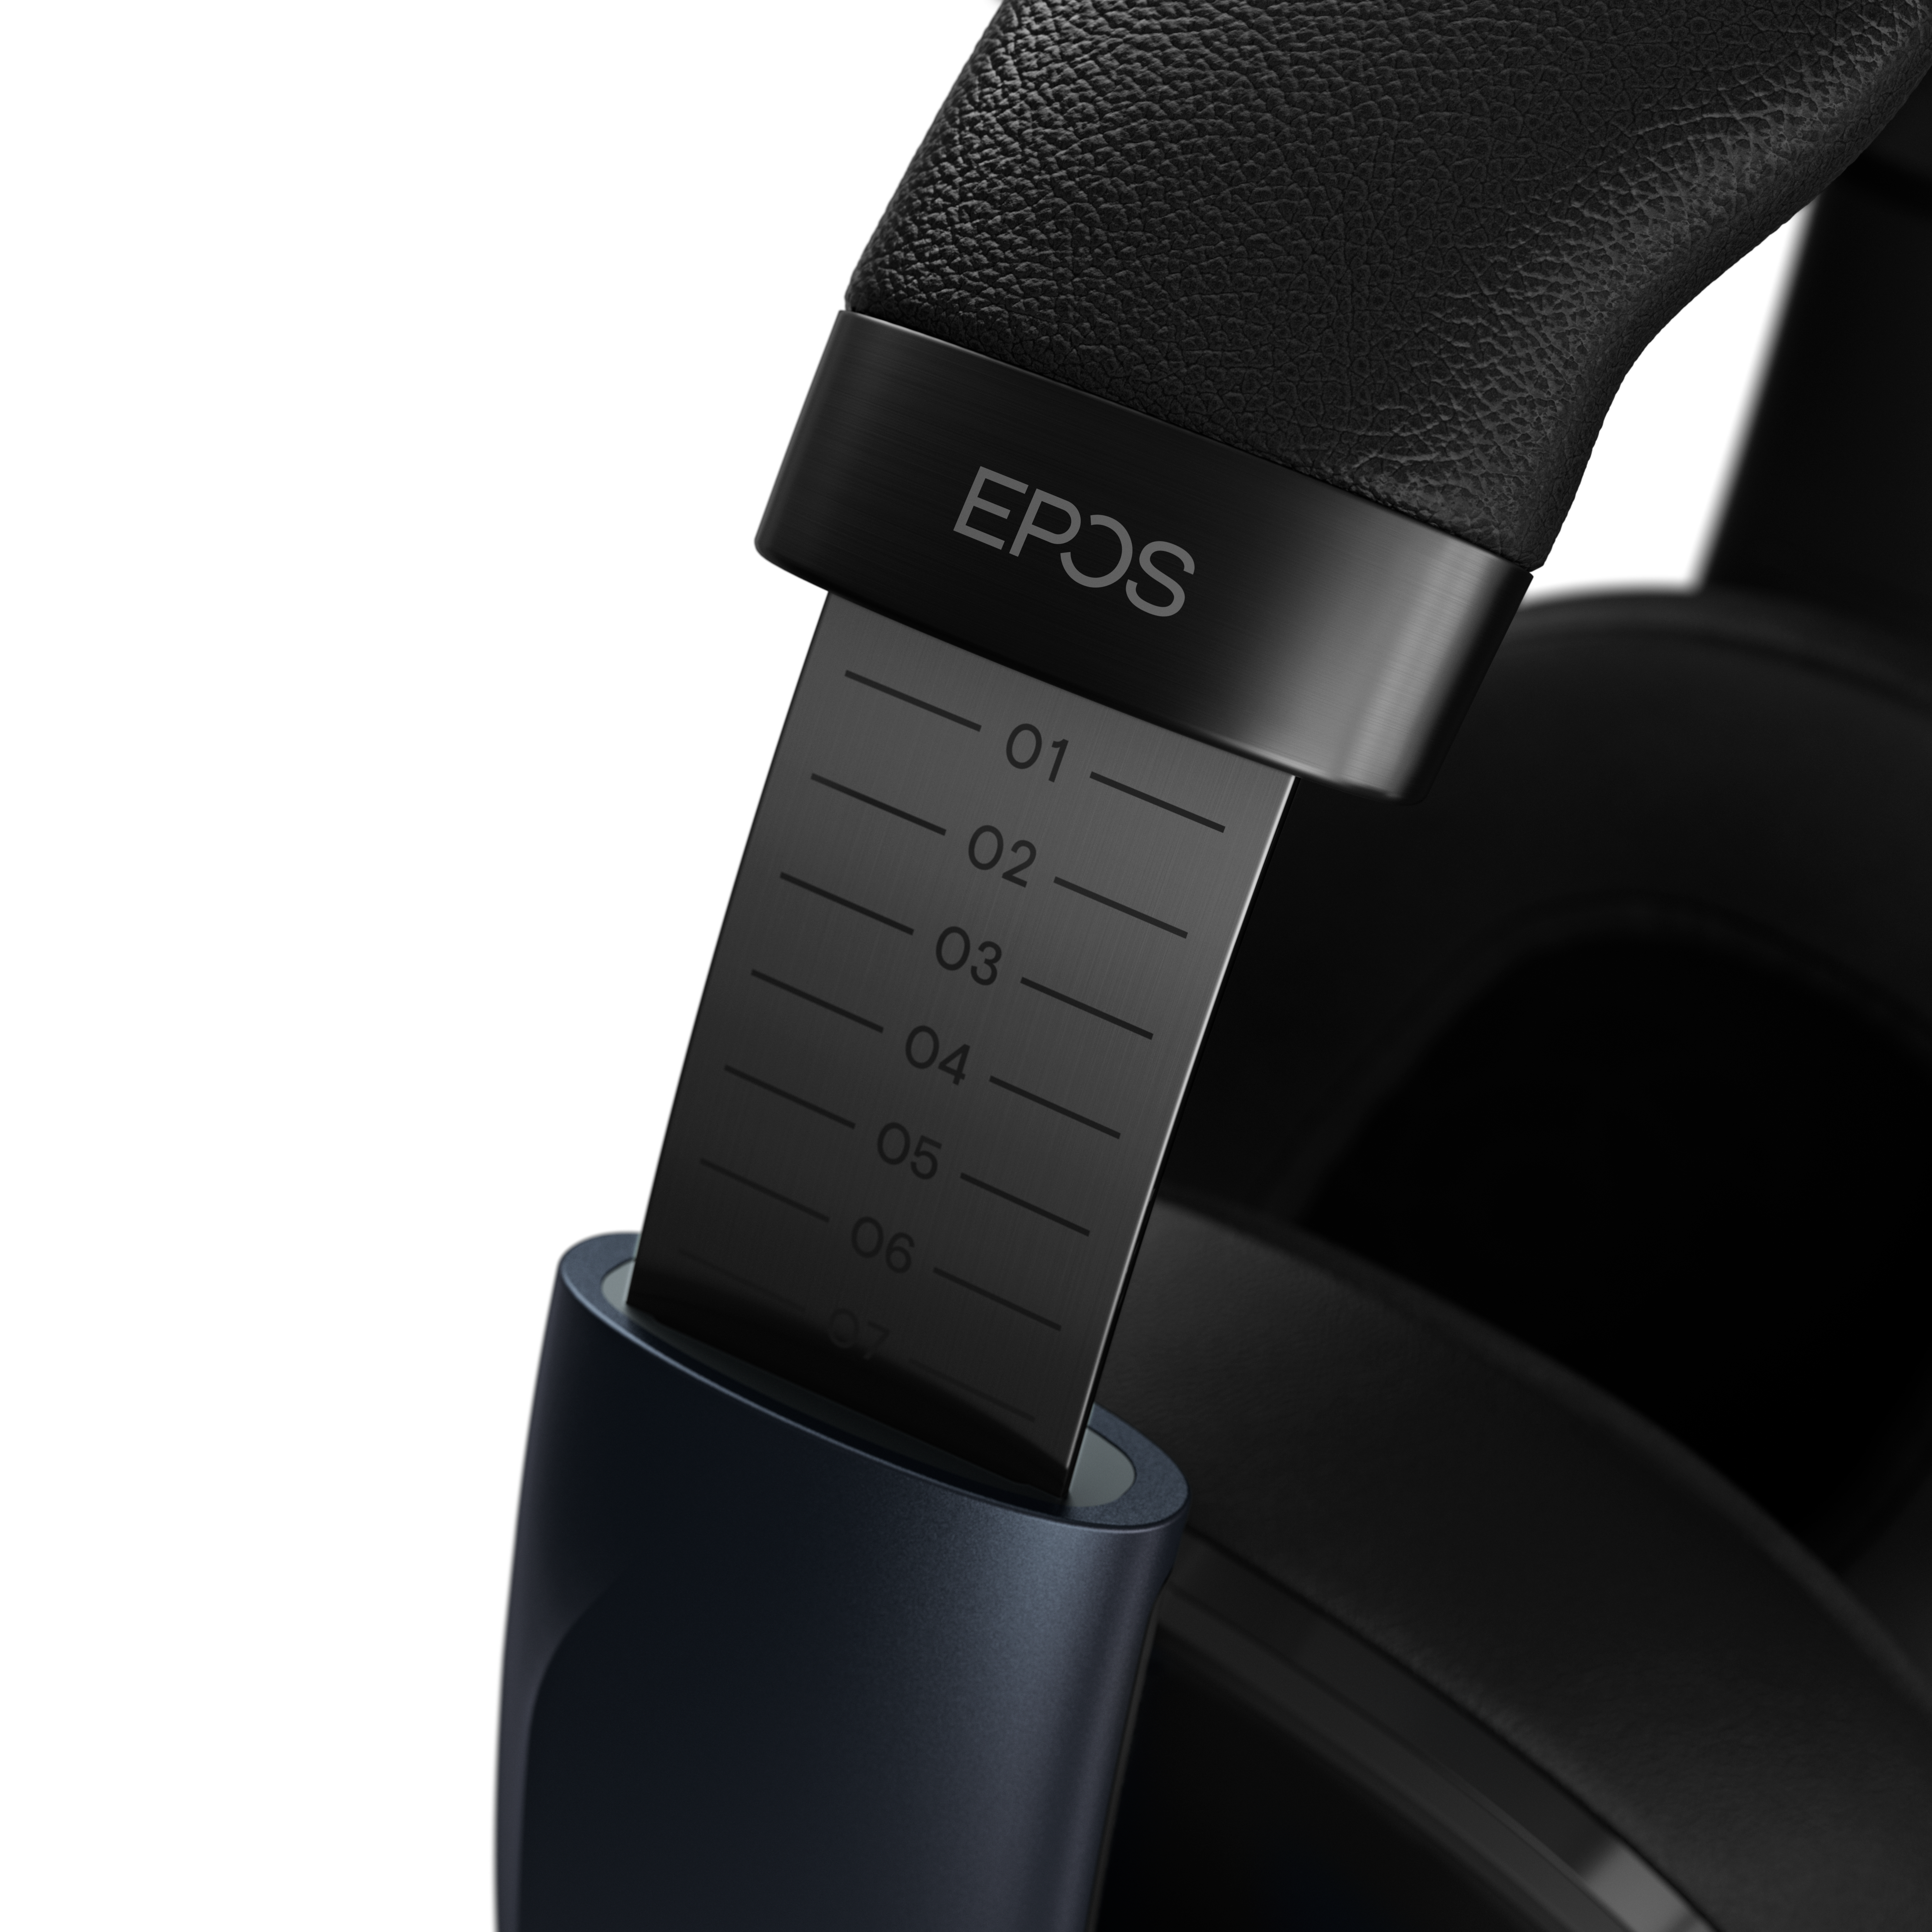 Save up to £95 off this Epos H6 Pro gaming headset from  in this  early Black Friday deal